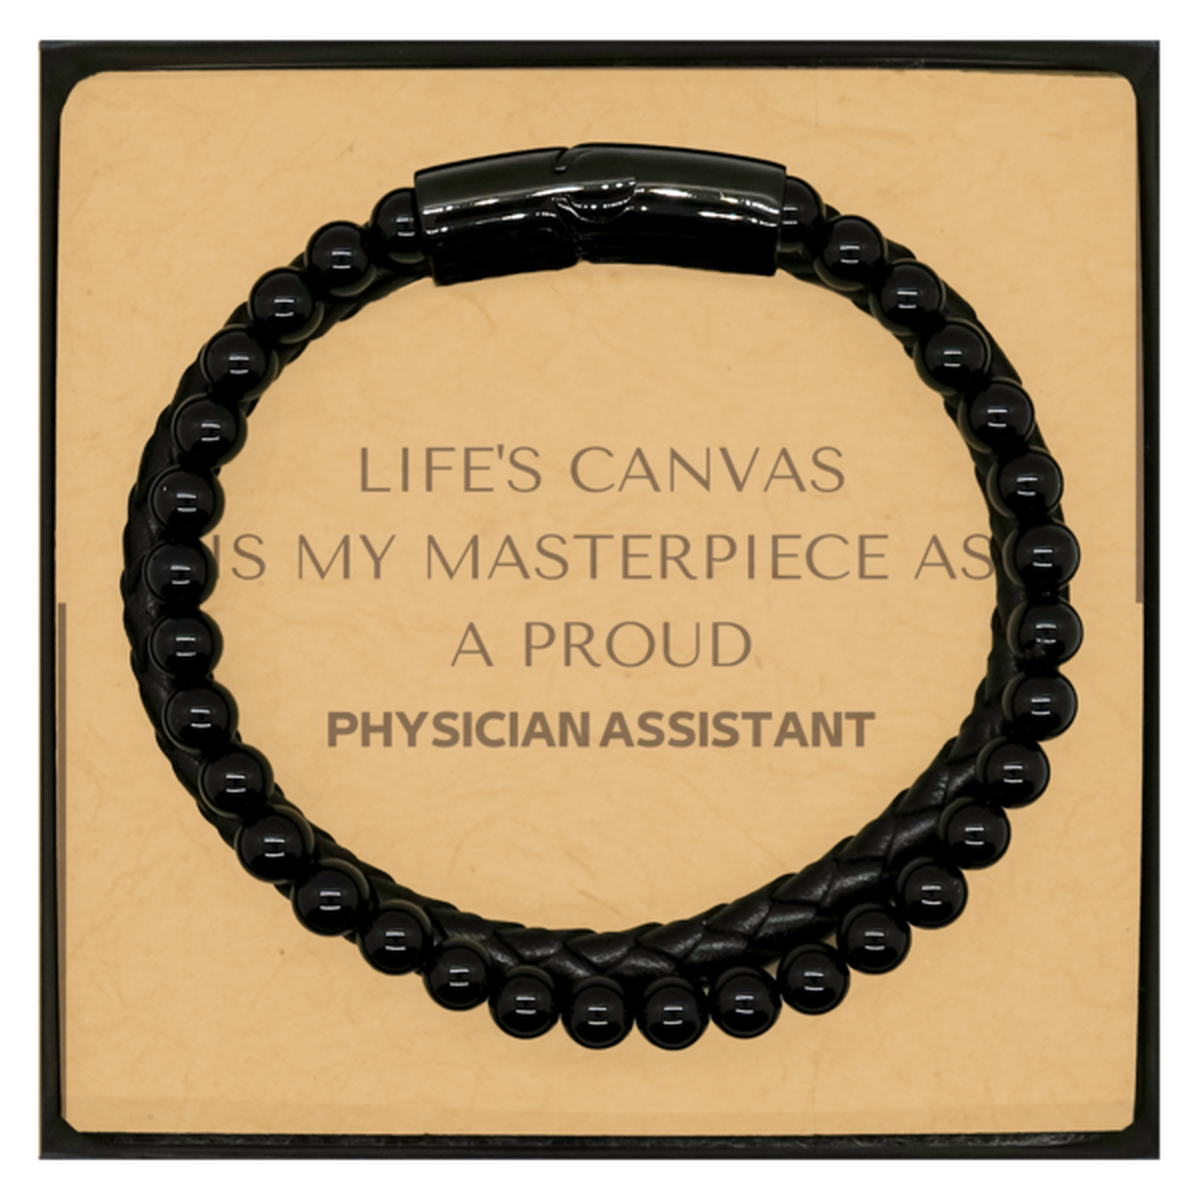 Proud Physician Assistant Gifts, Life's canvas is my masterpiece, Epic Birthday Christmas Unique Stone Leather Bracelets For Physician Assistant, Coworkers, Men, Women, Friends